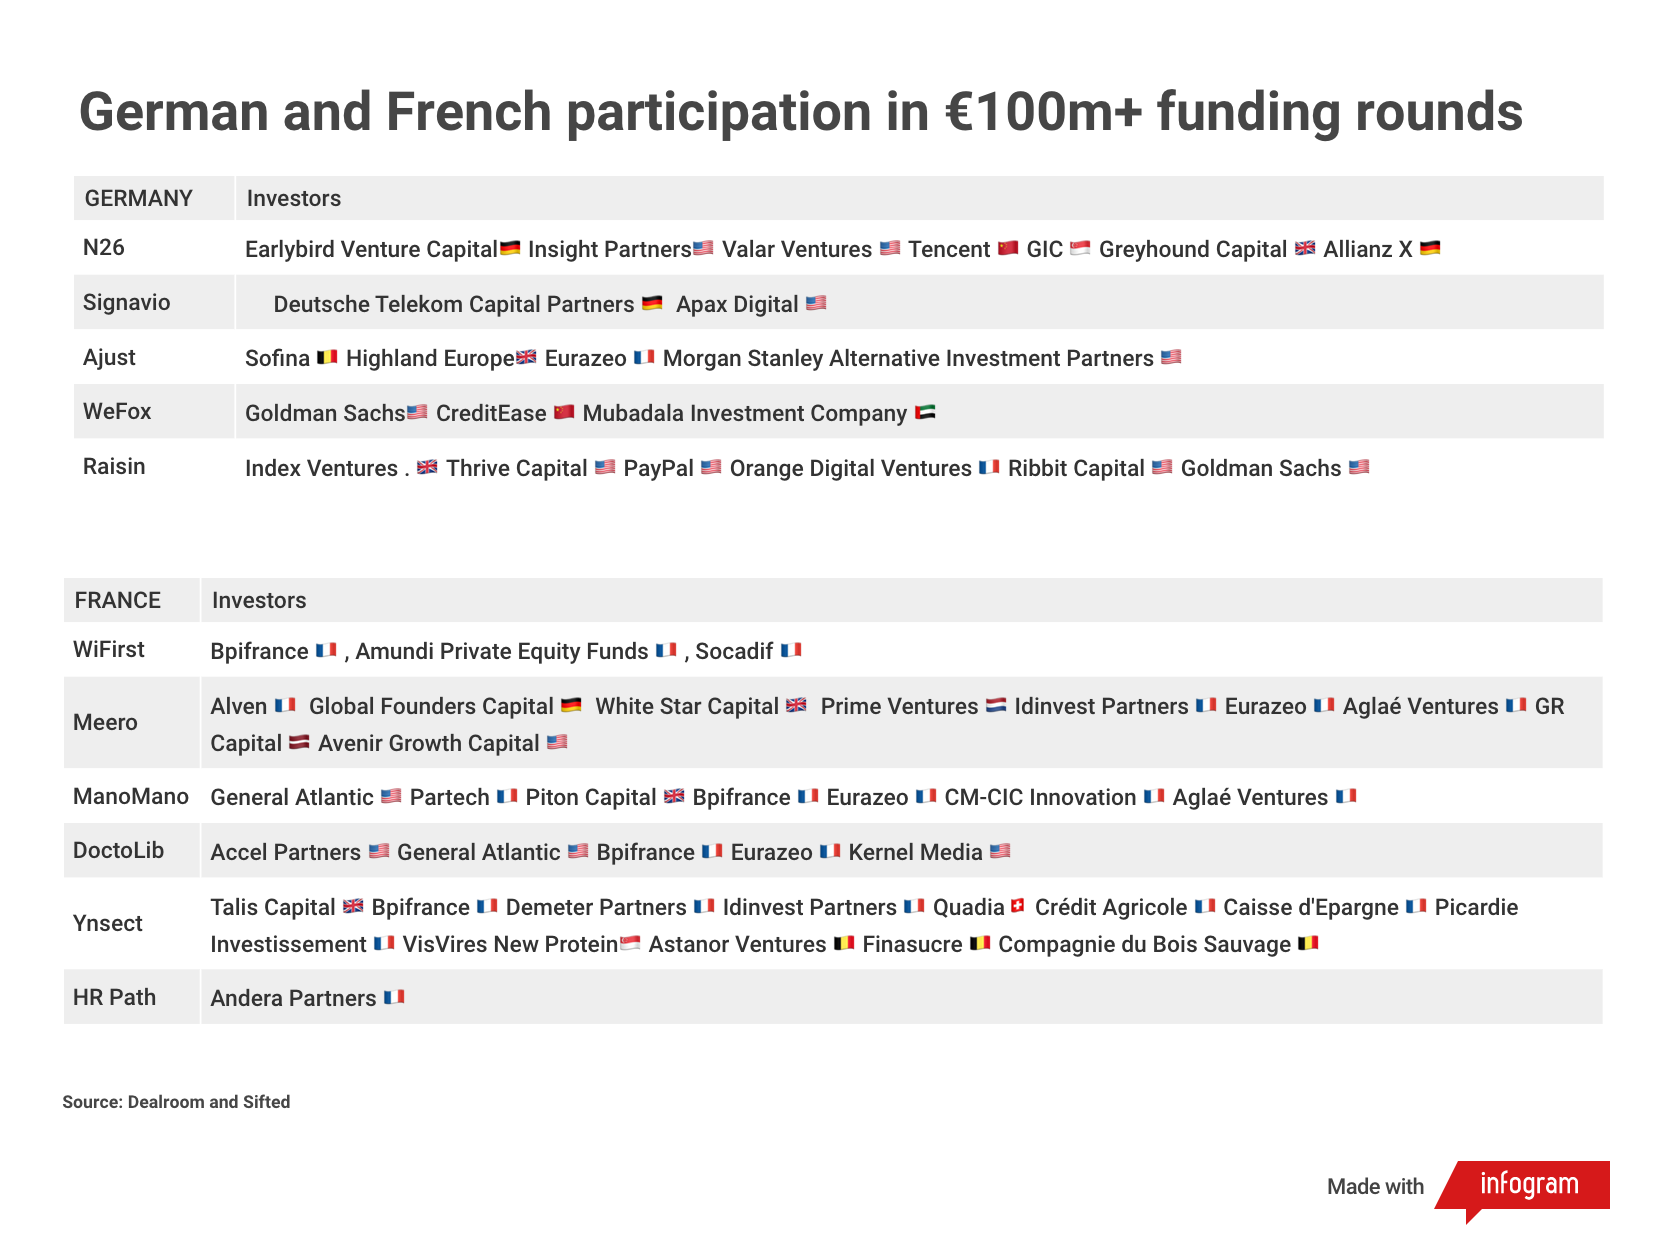 German and French participation in €100+ funding rounds